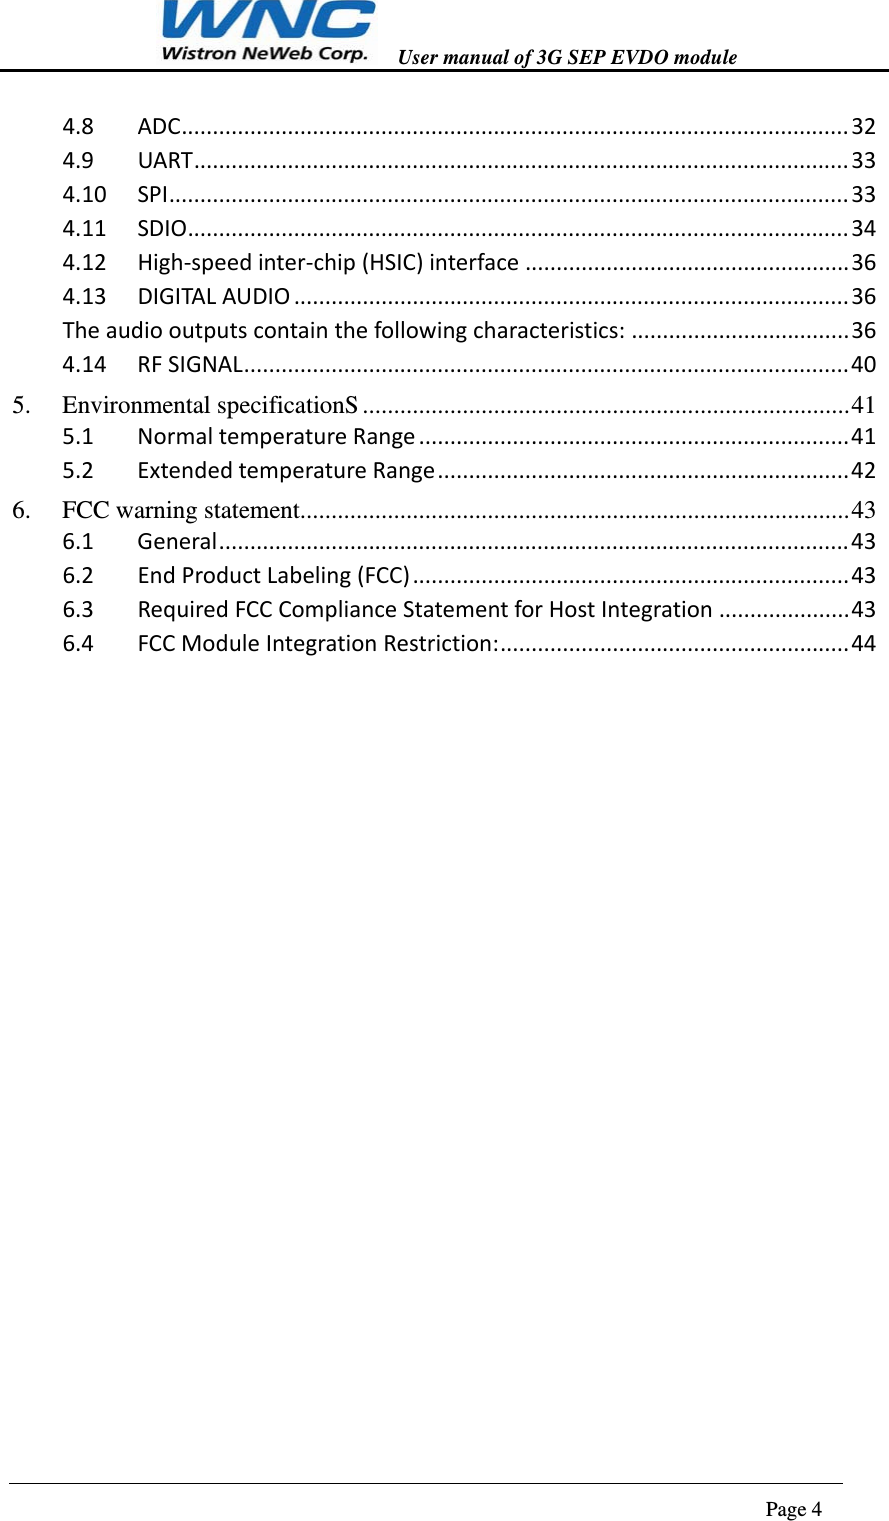   User manual of 3G SEP EVDO module                                                                      Page 4  4.8ADC...........................................................................................................324.9UART.........................................................................................................334.10SPI.............................................................................................................334.11SDIO..........................................................................................................344.12High‐speedinter‐chip(HSIC)interface....................................................364.13DIGITALAUDIO.........................................................................................36Theaudiooutputscontainthefollowingcharacteristics:...................................364.14RFSIGNAL.................................................................................................405.Environmental specificationS .............................................................................. 415.1NormaltemperatureRange.....................................................................415.2ExtendedtemperatureRange..................................................................426.FCC warning statement ........................................................................................ 436.1General.....................................................................................................436.2EndProductLabeling(FCC)......................................................................436.3RequiredFCCComplianceStatementforHostIntegration.....................436.4FCCModuleIntegrationRestriction:........................................................44